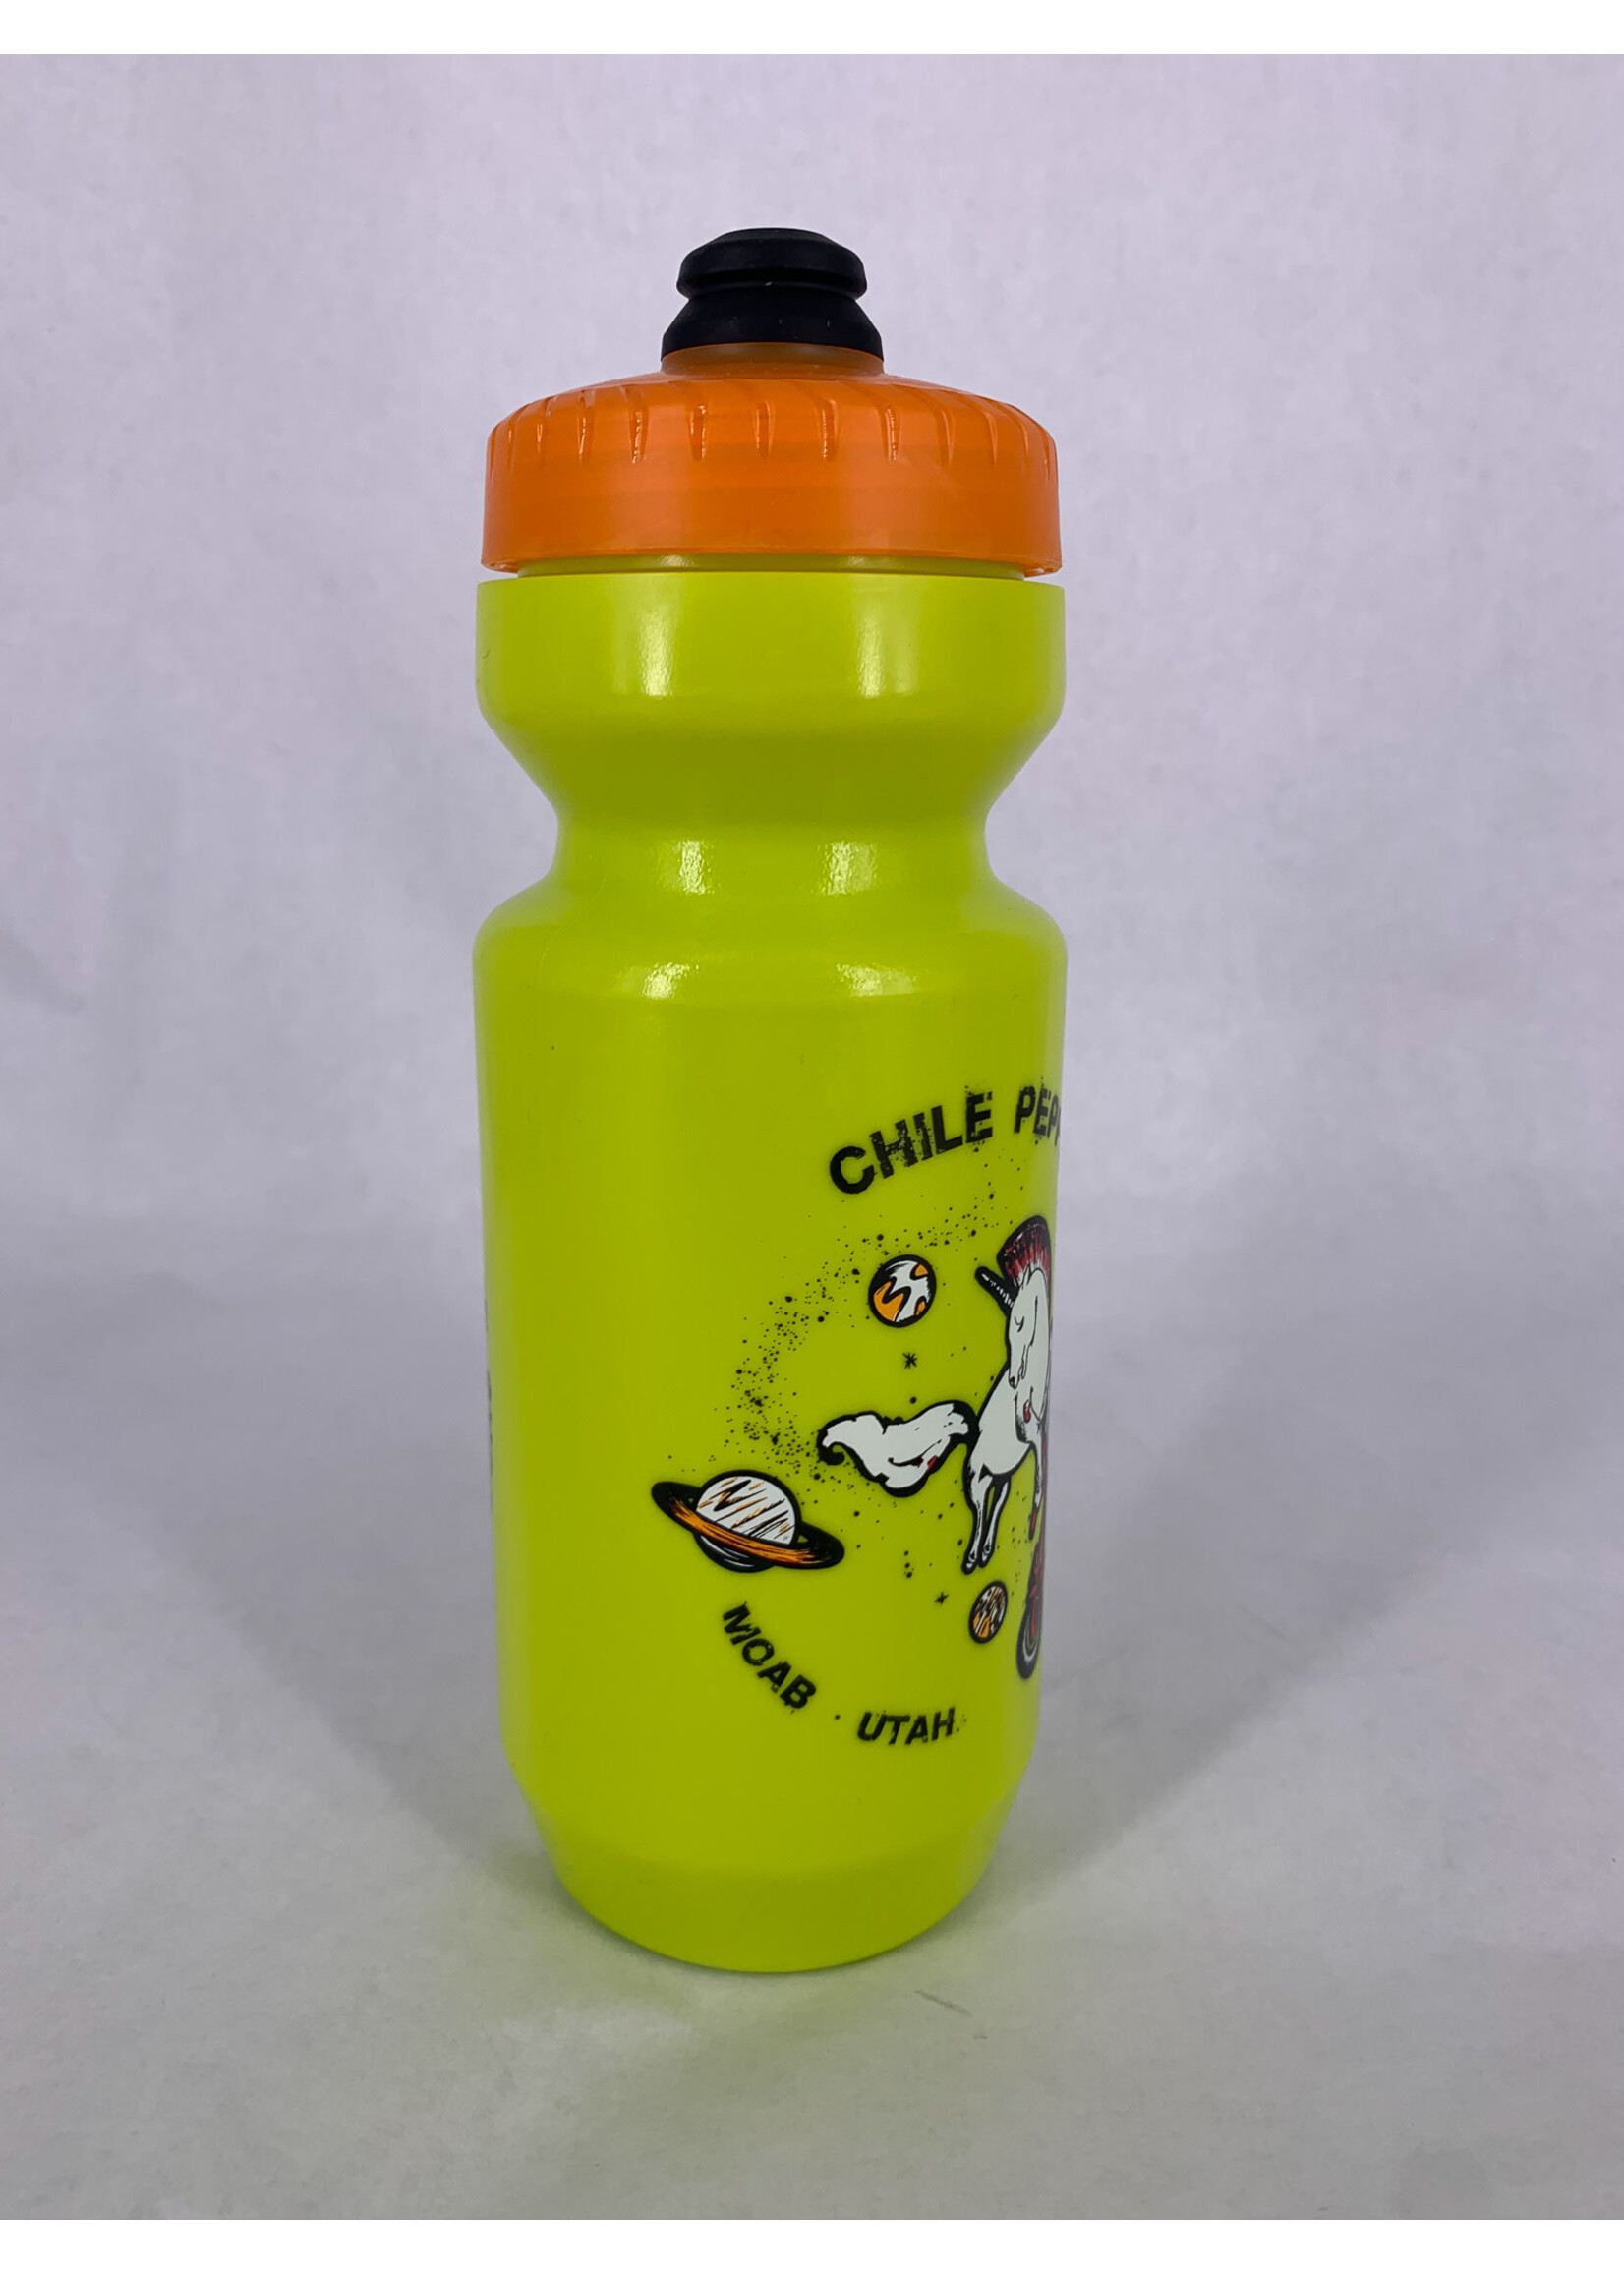 Chile Pepper Chile Unicorn Tailwhip 22oz. Water Bottle